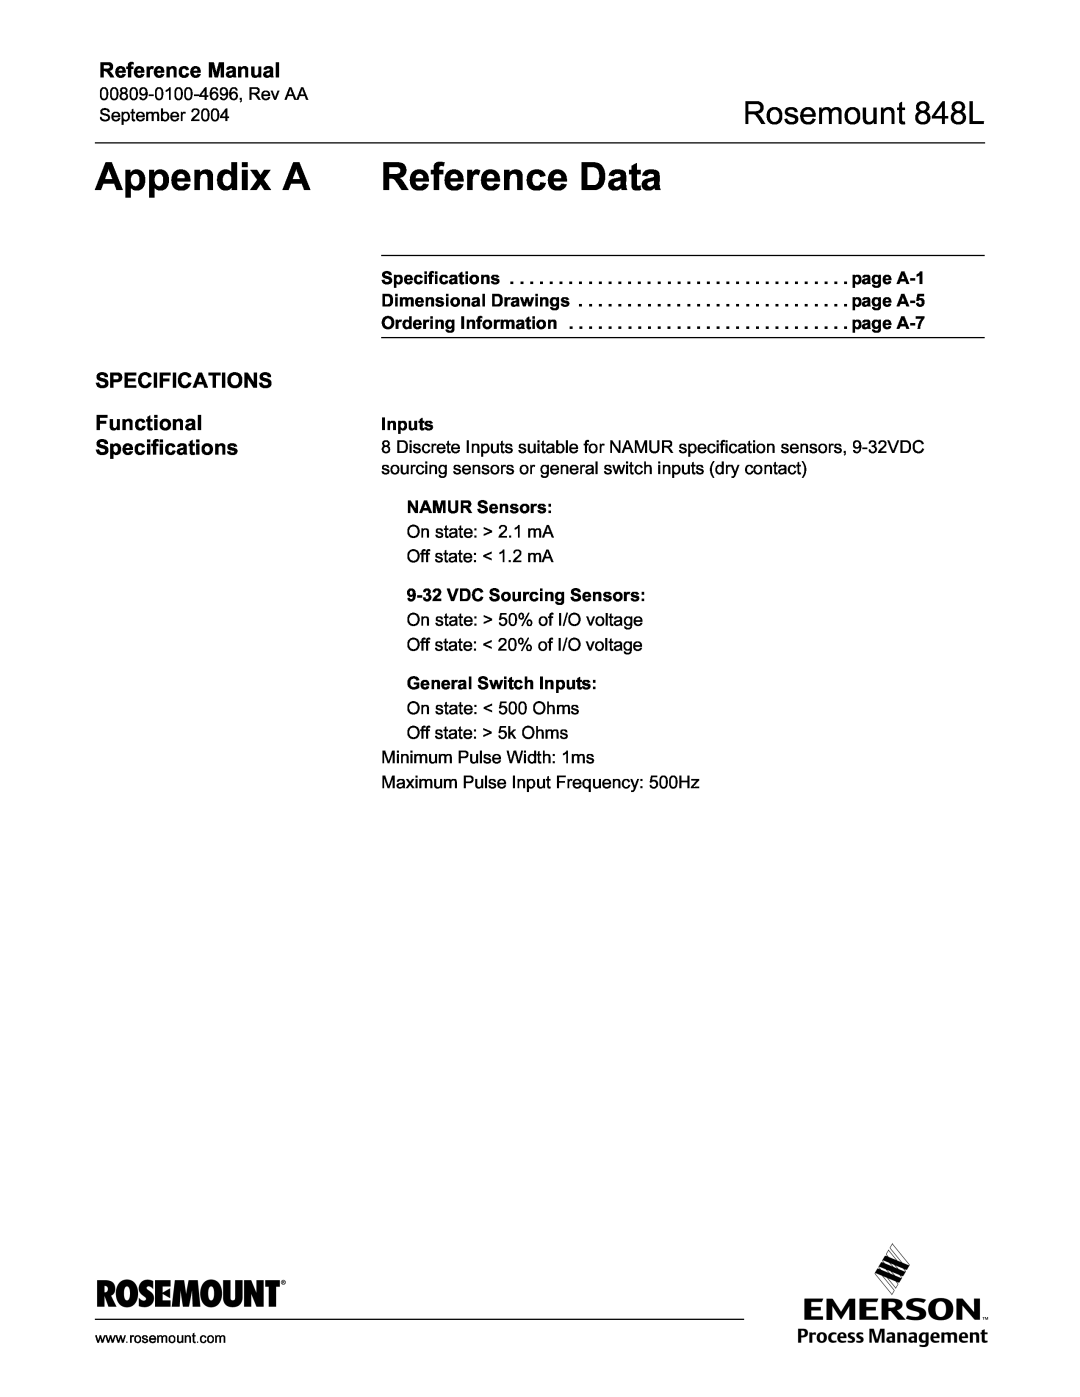 Emerson manual Appendix A, Reference Data, SPECIFICATIONS Functional Specifications, Rosemount 848L, Reference Manual 